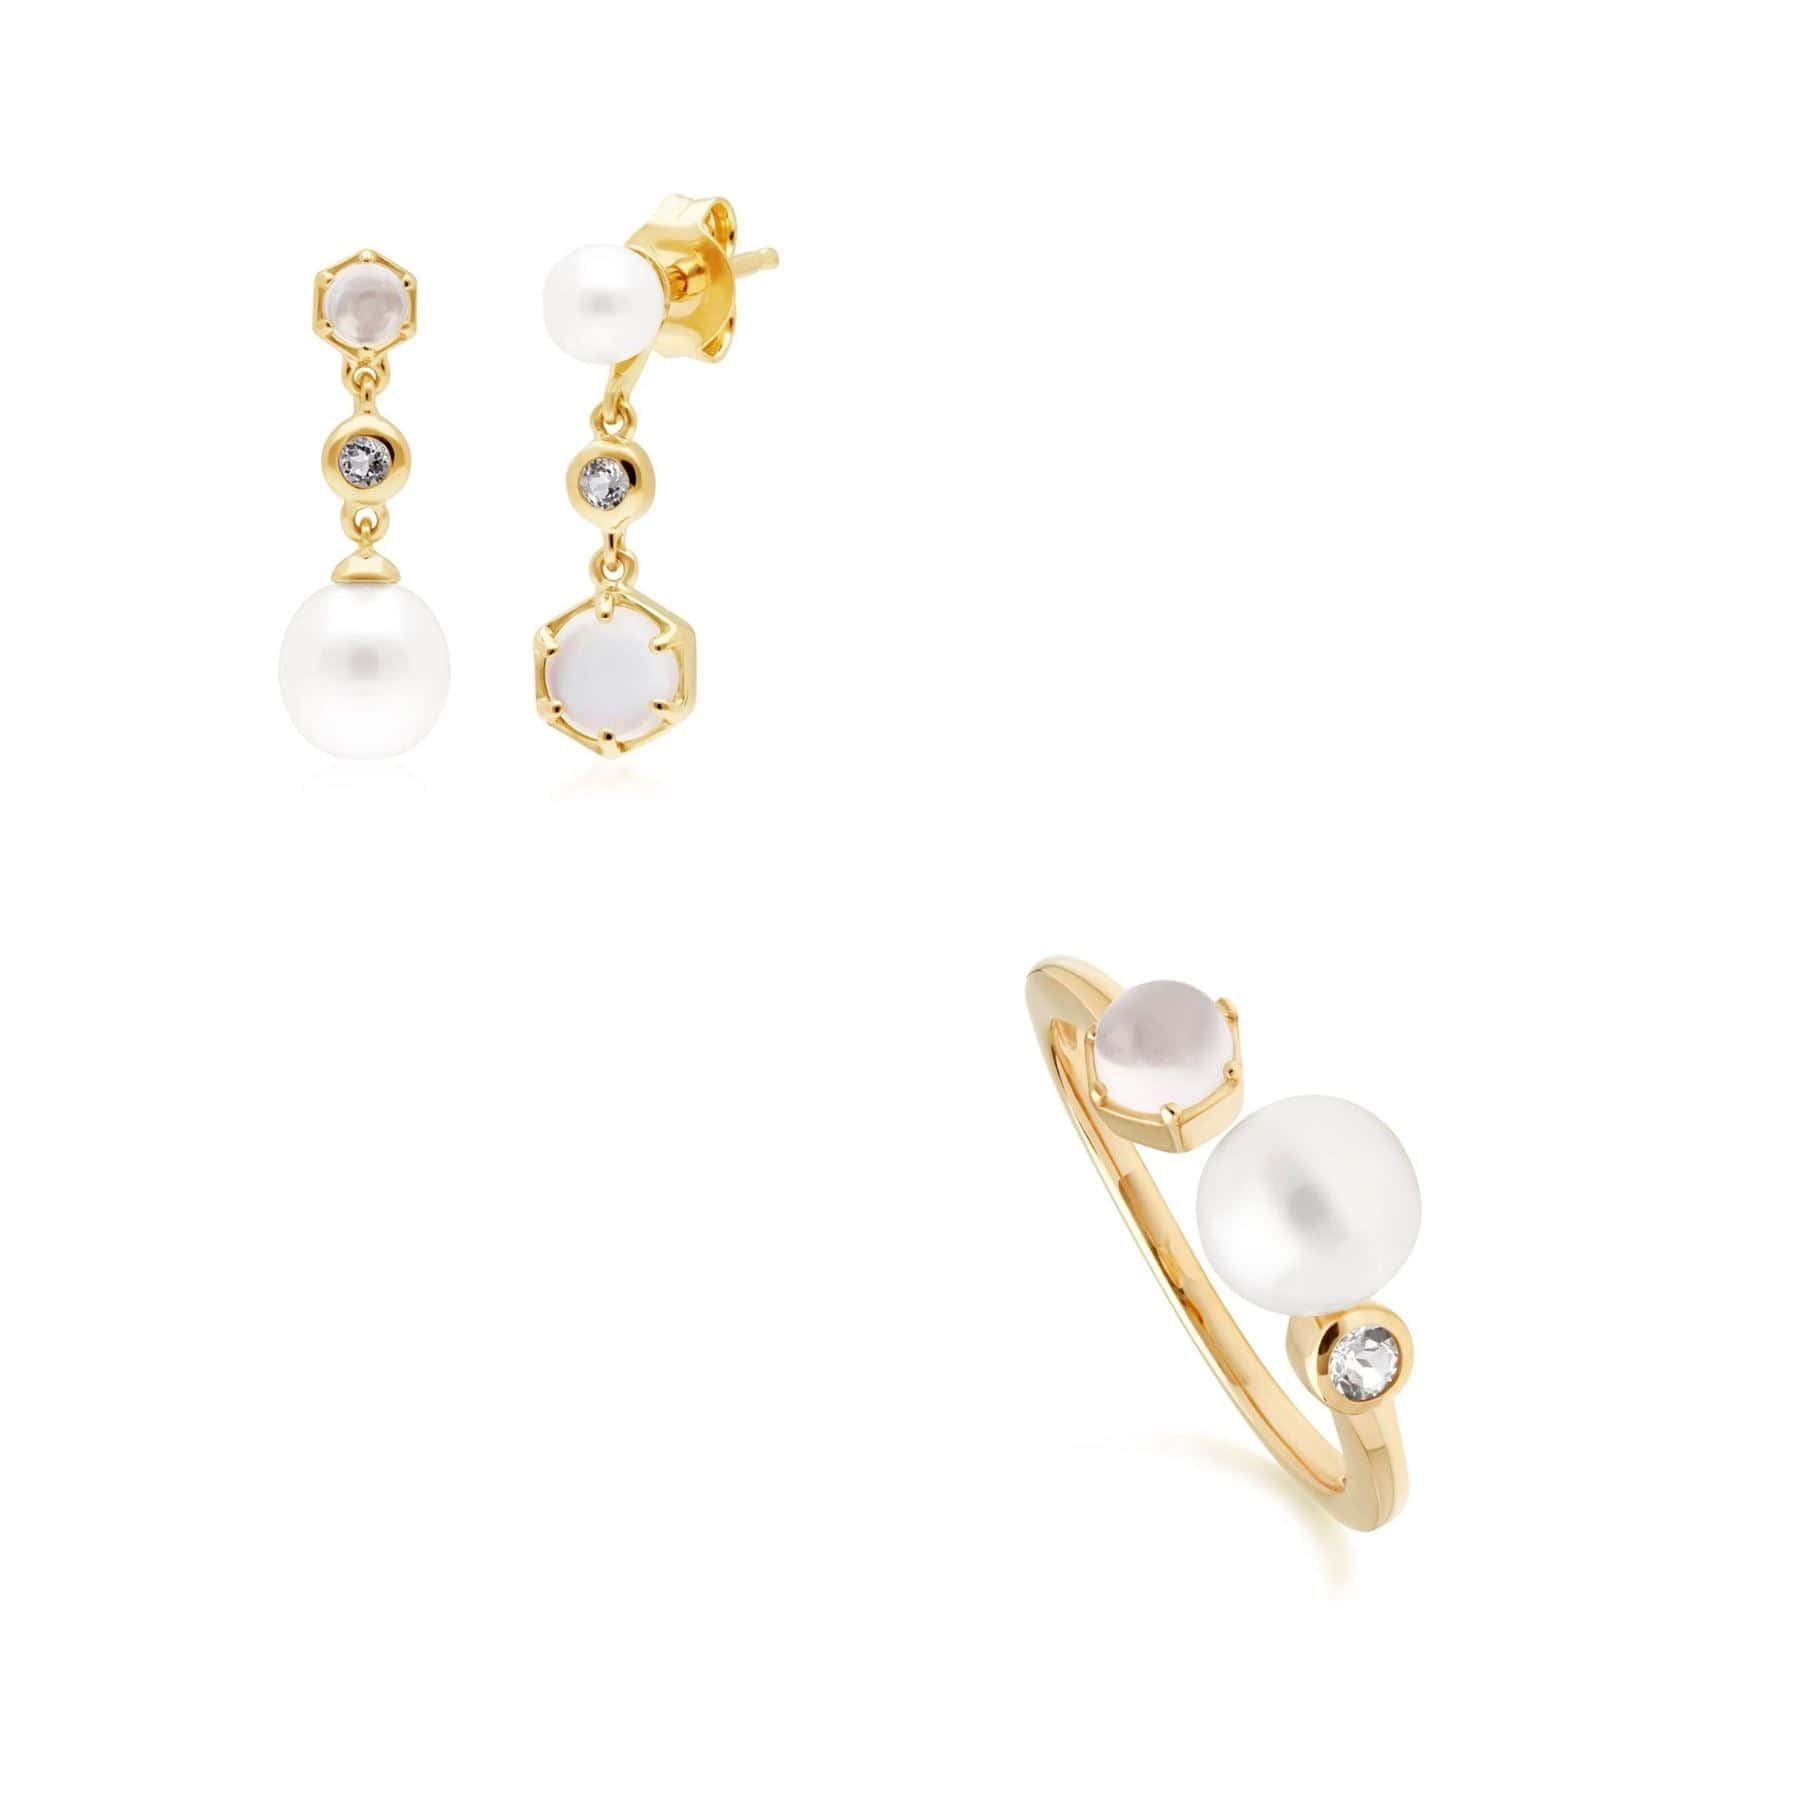 270E030702925-270R059102925 Modern Pearl, Topaz & Moonstone Earring & Ring Set in Gold Plated Silver 1